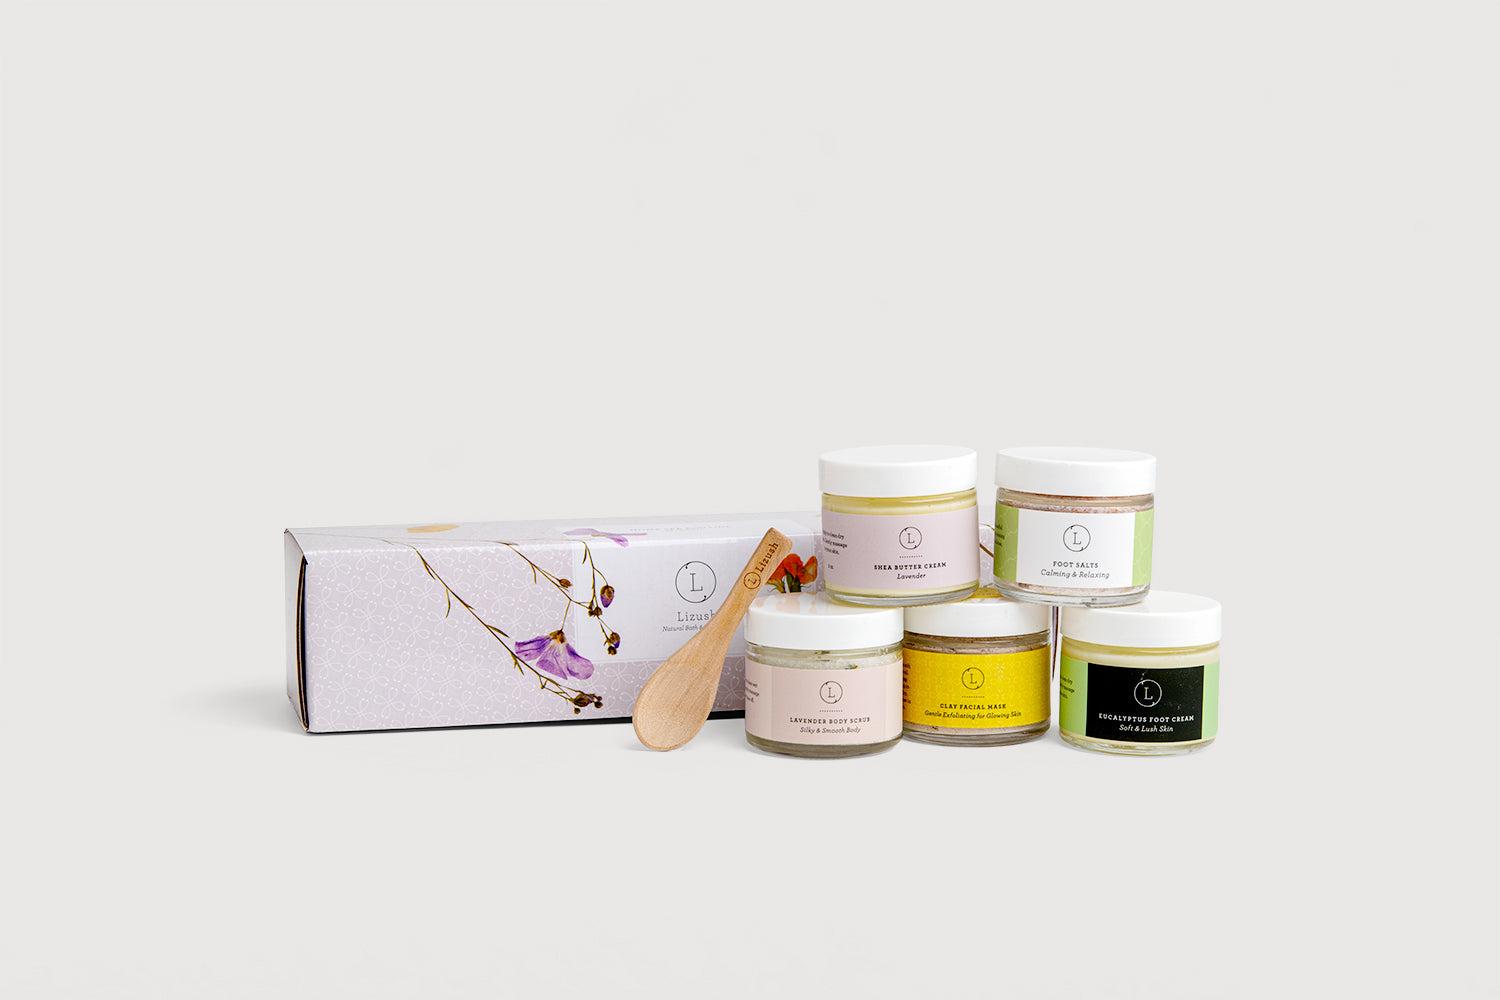 A Full body Luxury Home Spa Routine Gift Set, Perfect Mother’s Day gift – Buy 4 jars Get 5 th FREE!